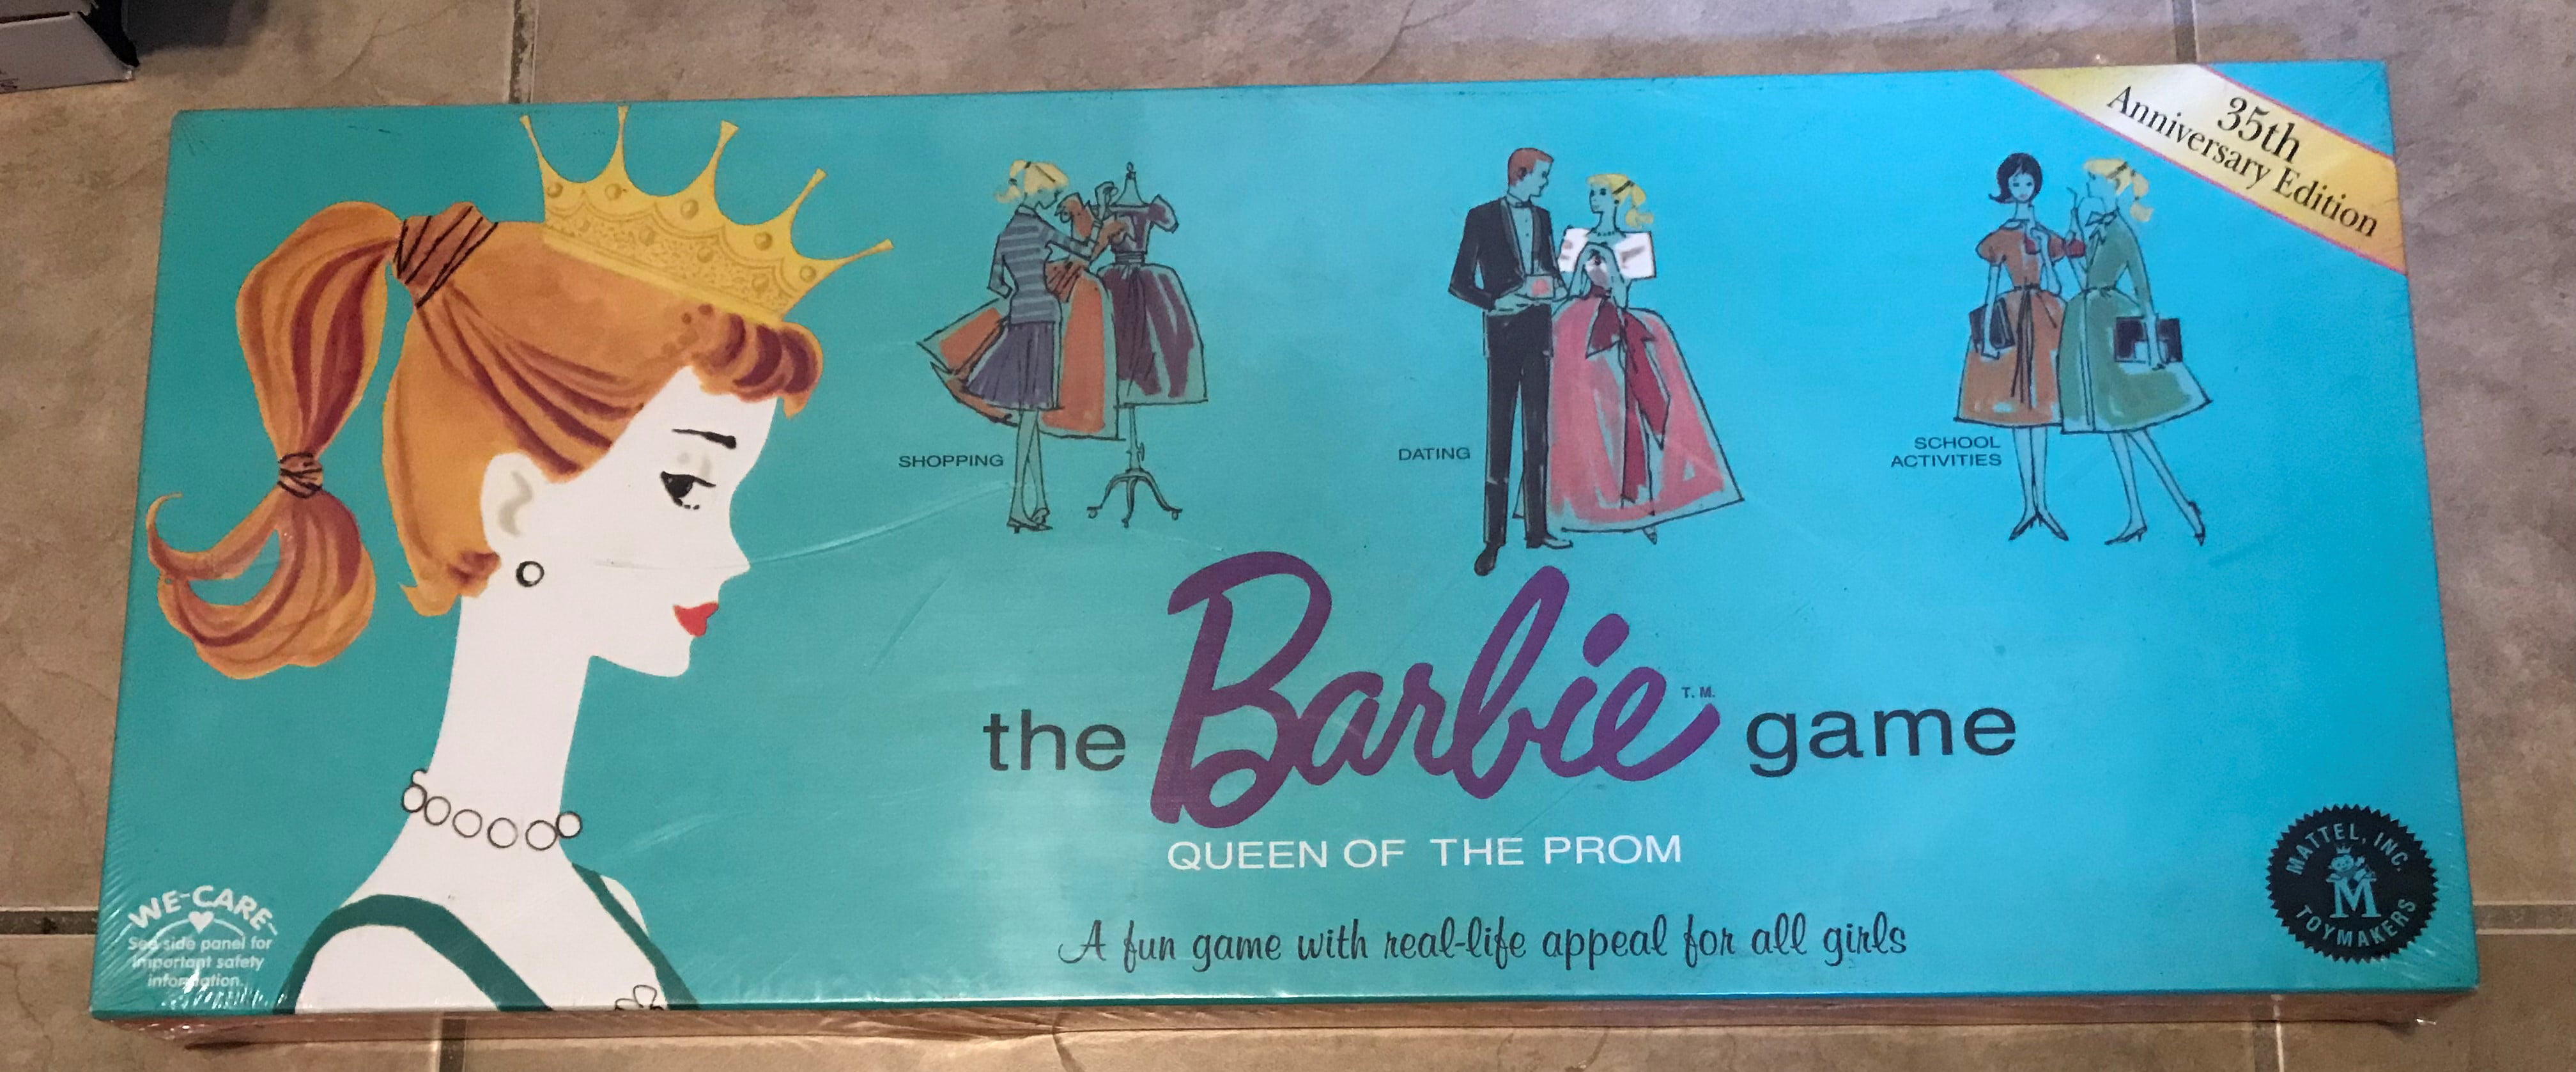 the barbie game queen of the prom 35th anniversary